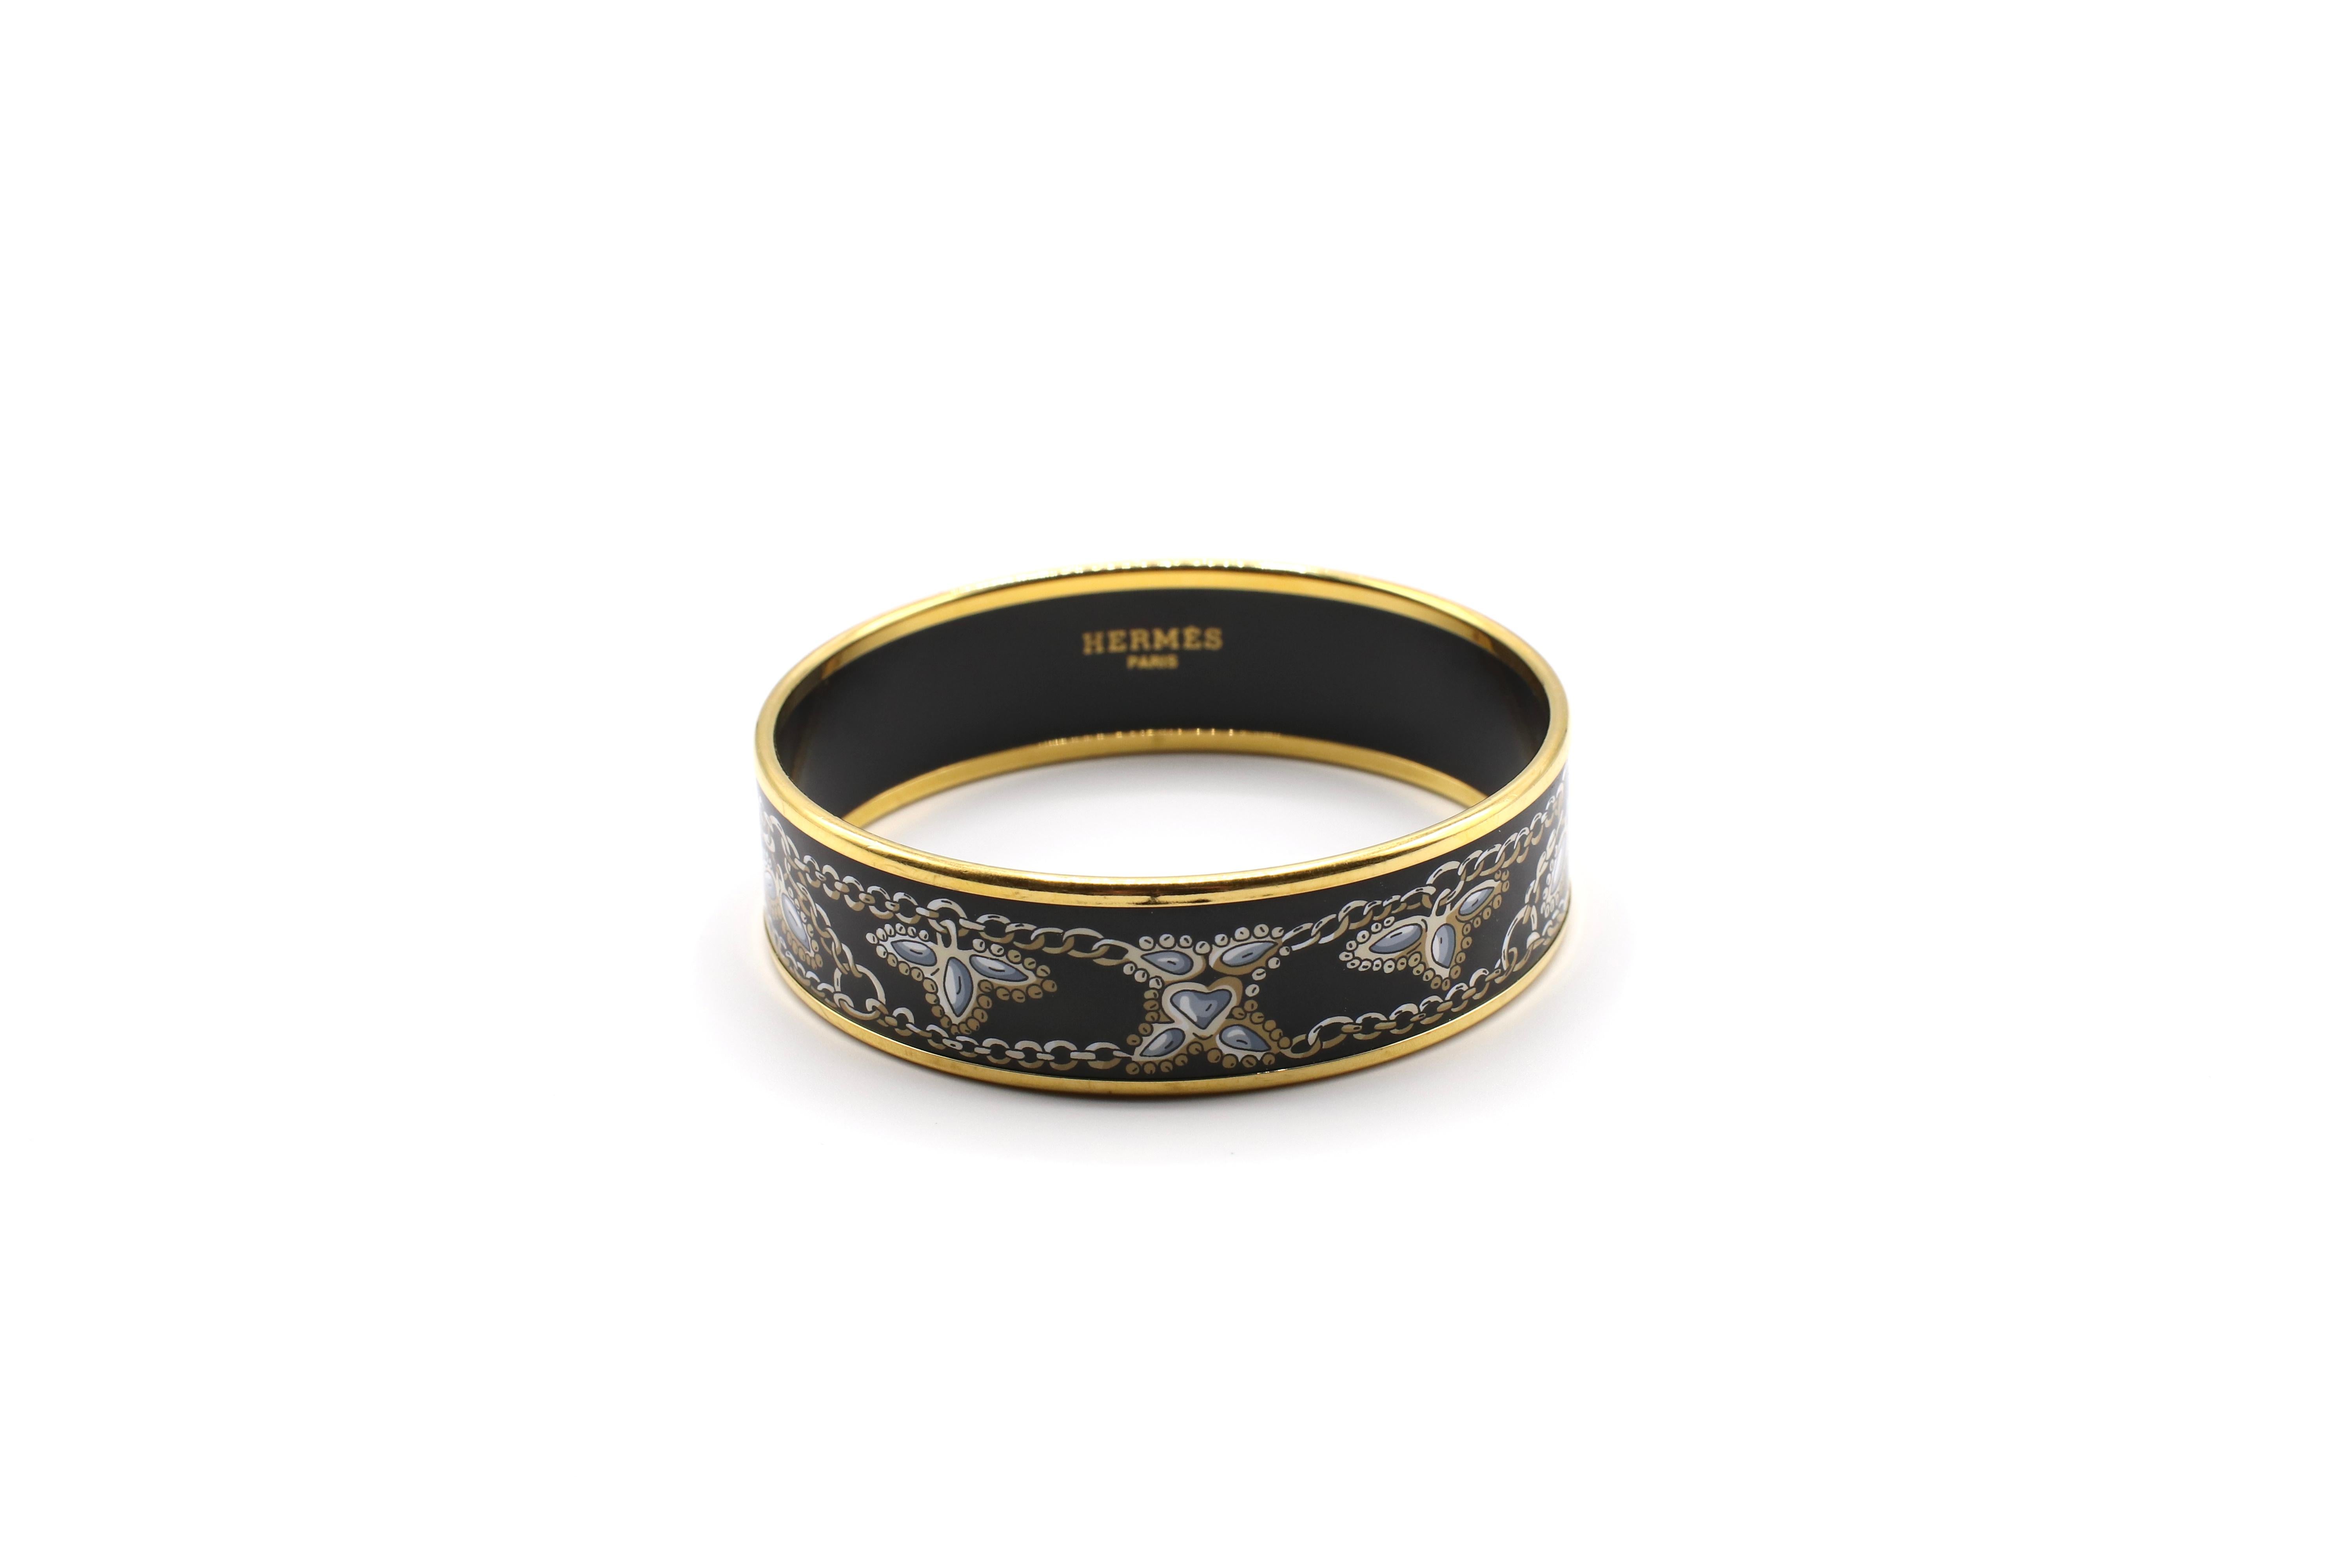 For sale is a Hermes Bangle Bracelet made of 18K Yellow Gold-Plate and Enamel in a Black and Gold Charm Bracelet Design. The bracelet fits approx a 6 inch wrist but can be tight fit because of it's thickness. The thickness is approx